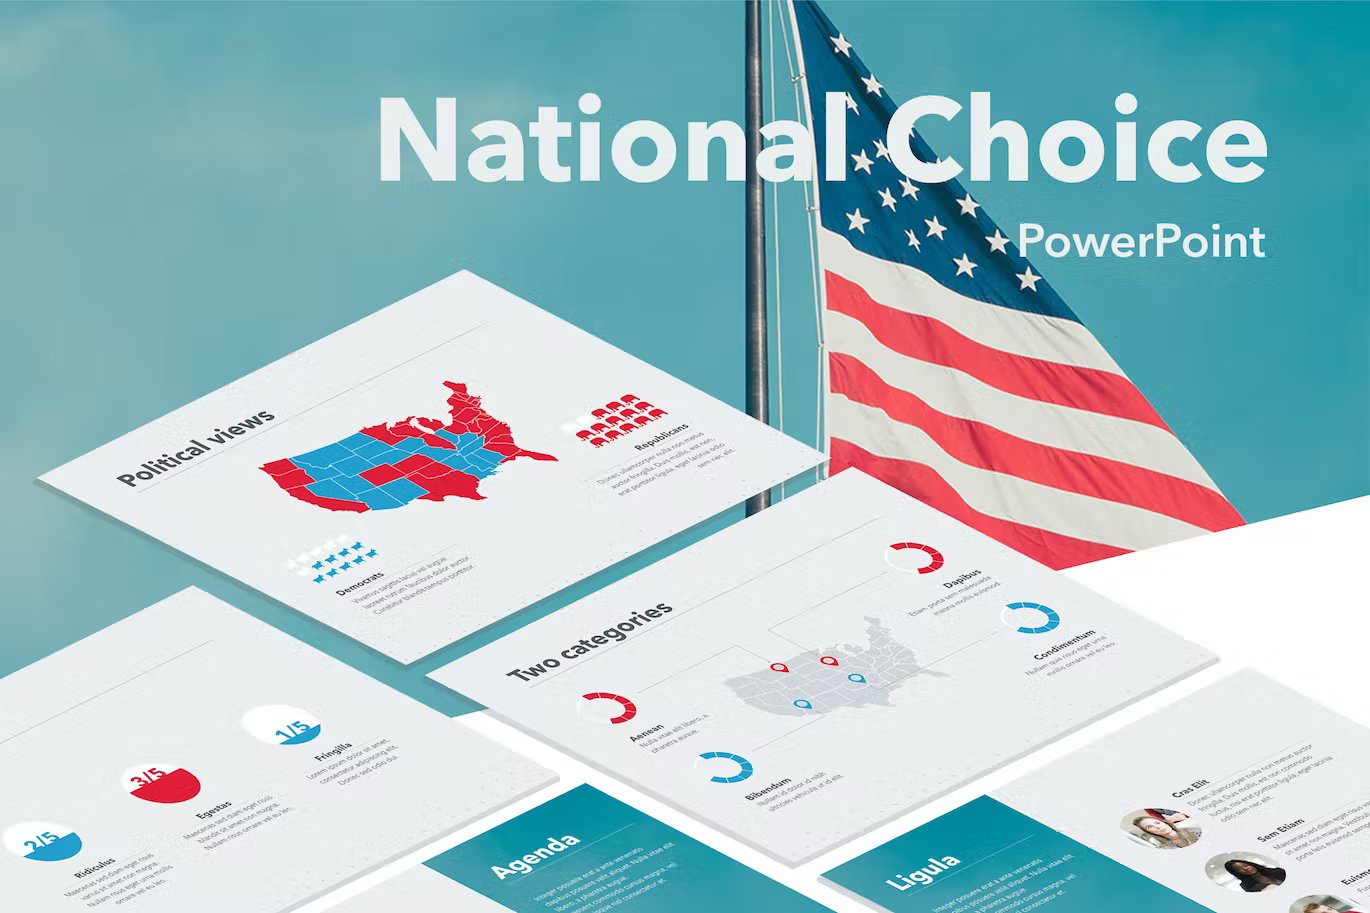 White lettering "National Choice PowerPoint" and different presentation templates and the American flag on a turquoise background.